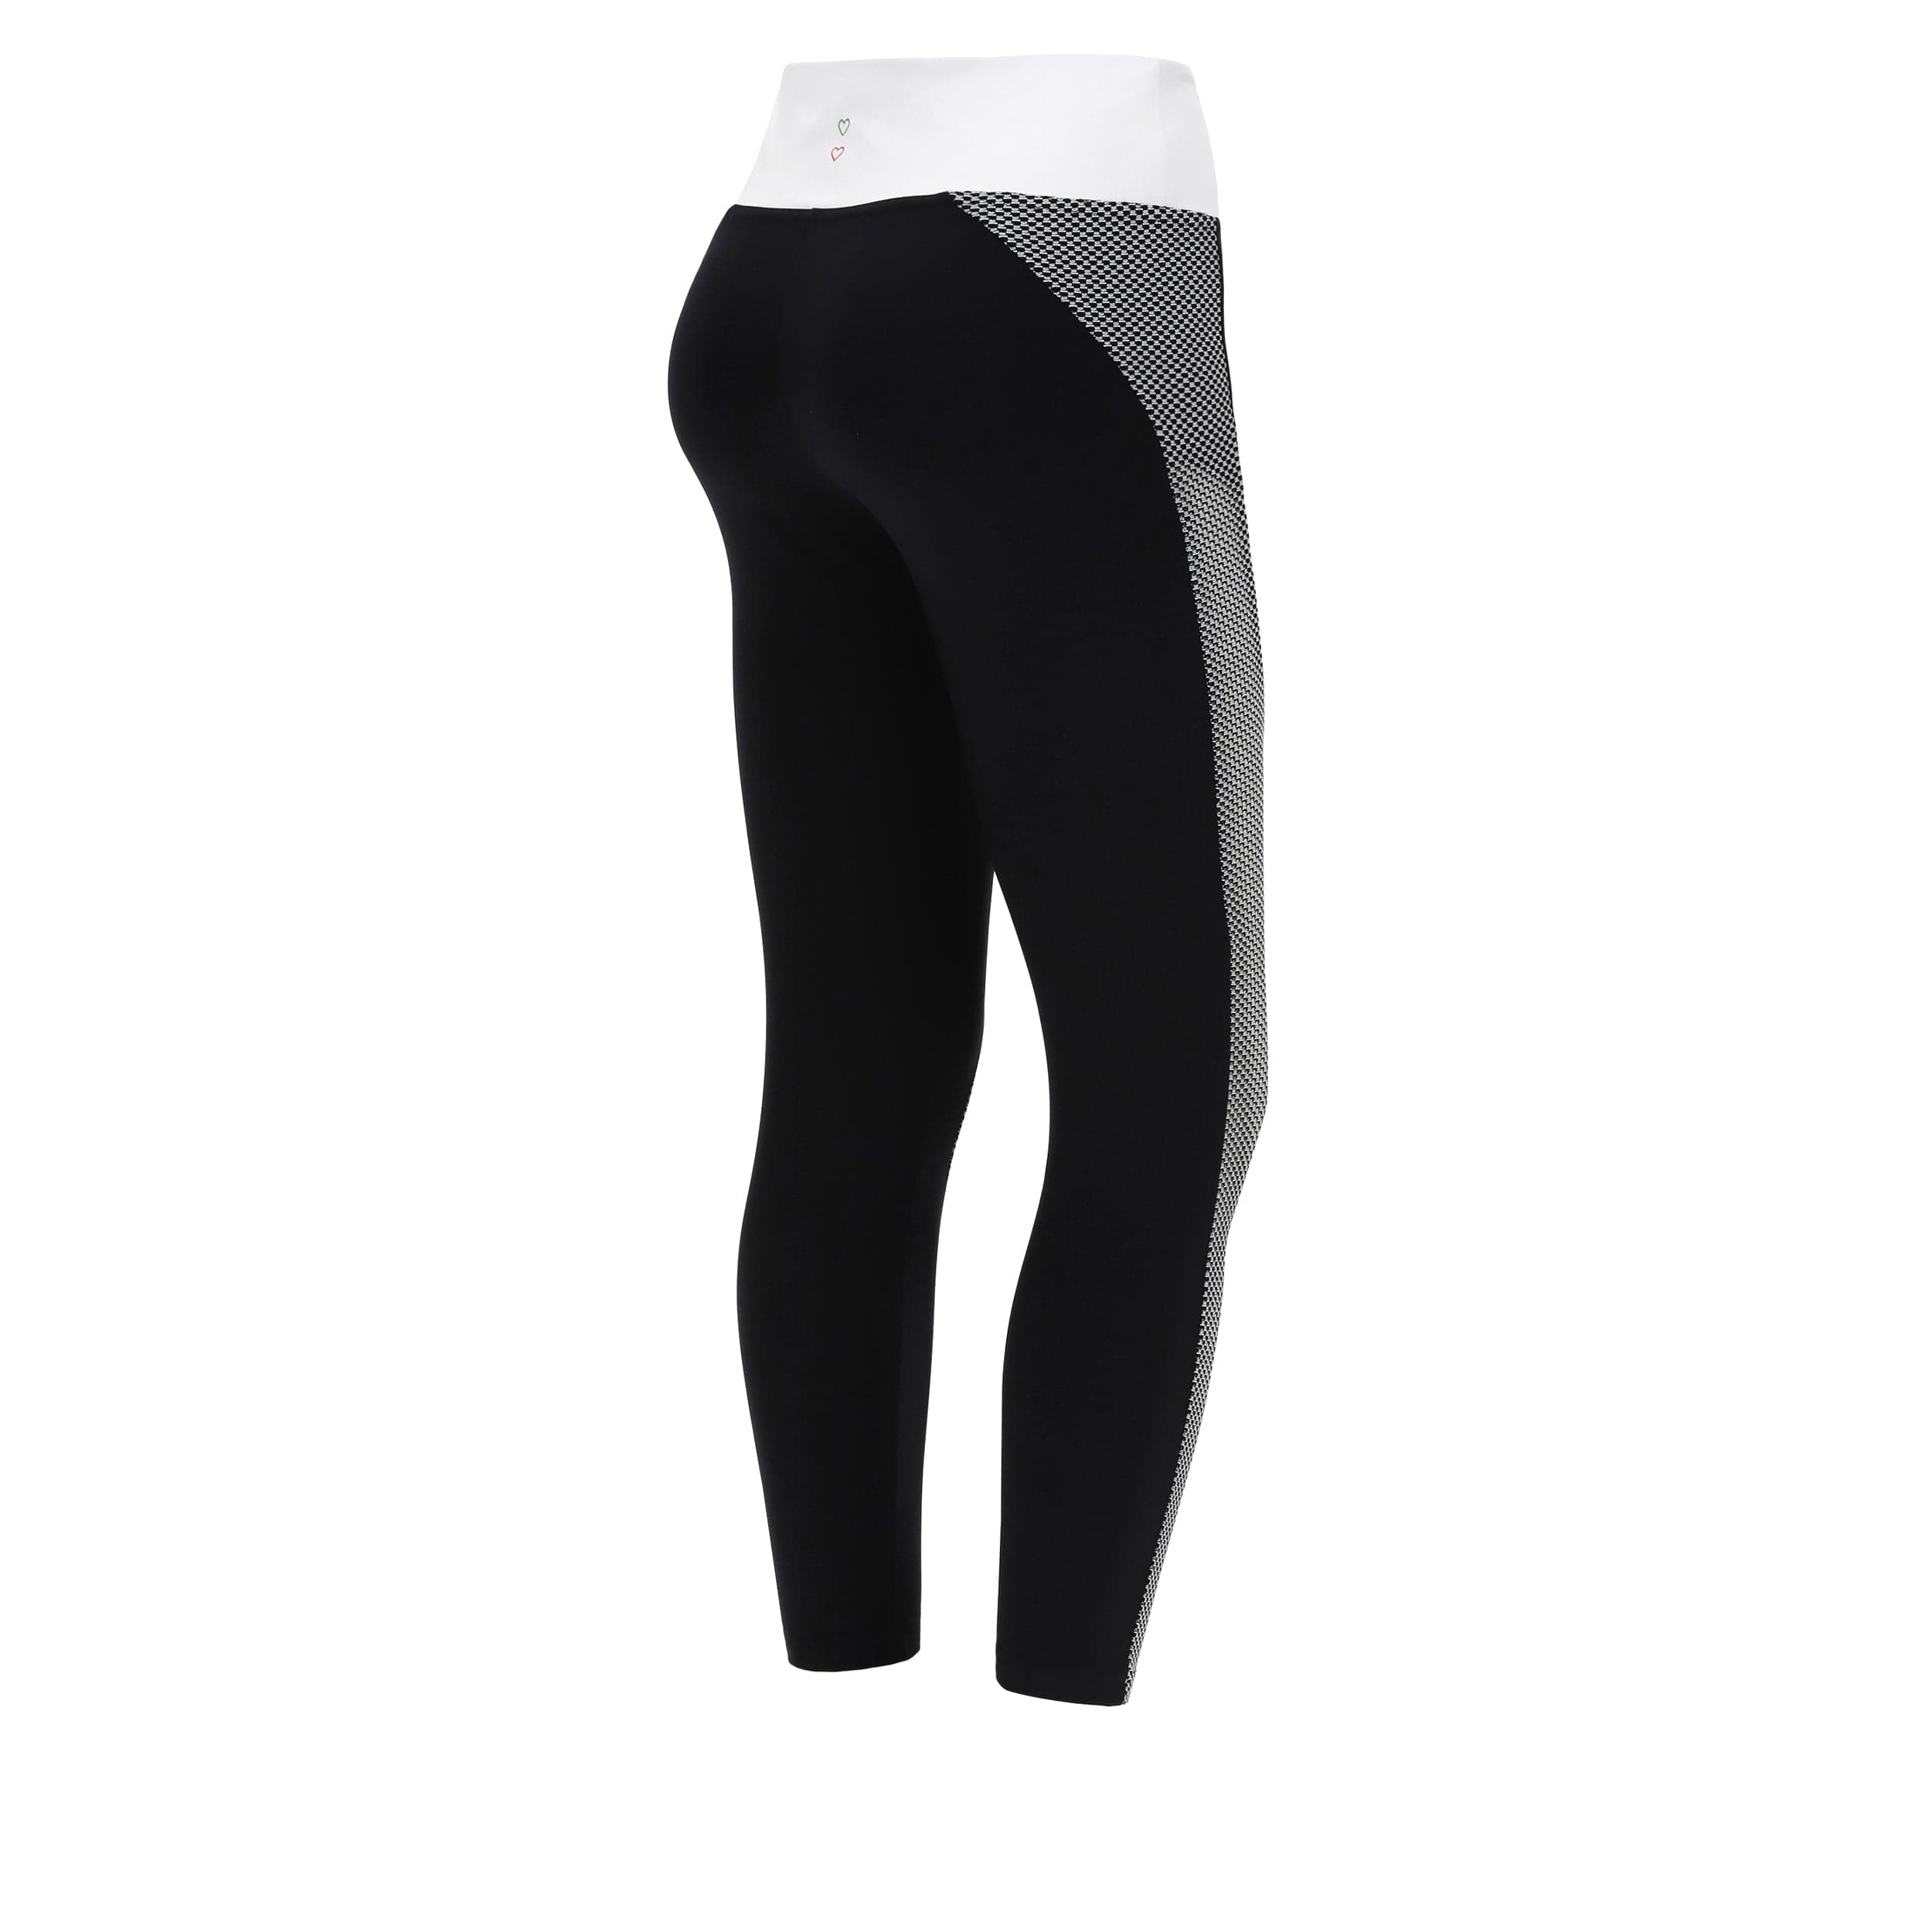 SuperFit Activewear - Mid Rise - 7/8 Length - Black + White Pattern 1